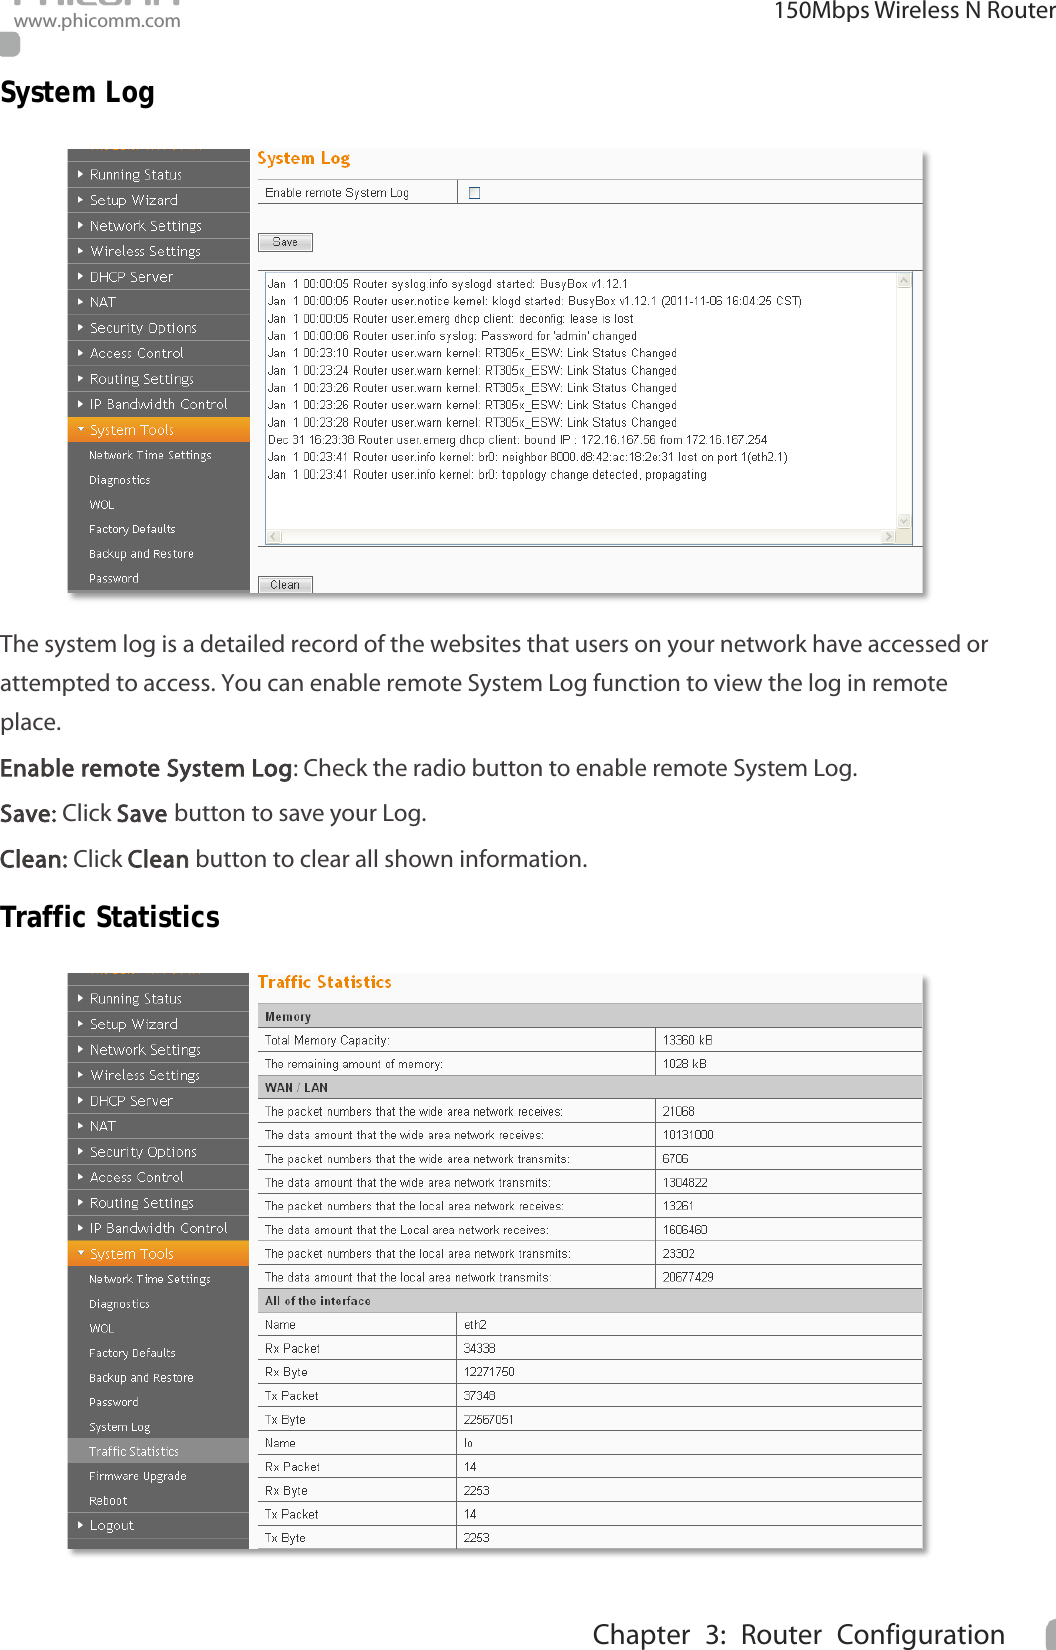                                                            150Mbps Wireless N Router www.phicomm.com 39 Chapter 3: Router Configuration  System Log  The system log is a detailed record of the websites that users on your network have accessed or attempted to access. You can enable remote System Log function to view the log in remote place. Enable remote System Log: Check the radio button to enable remote System Log. Save: Click Save button to save your Log. Clean: Click Clean button to clear all shown information. Traffic Statistics    